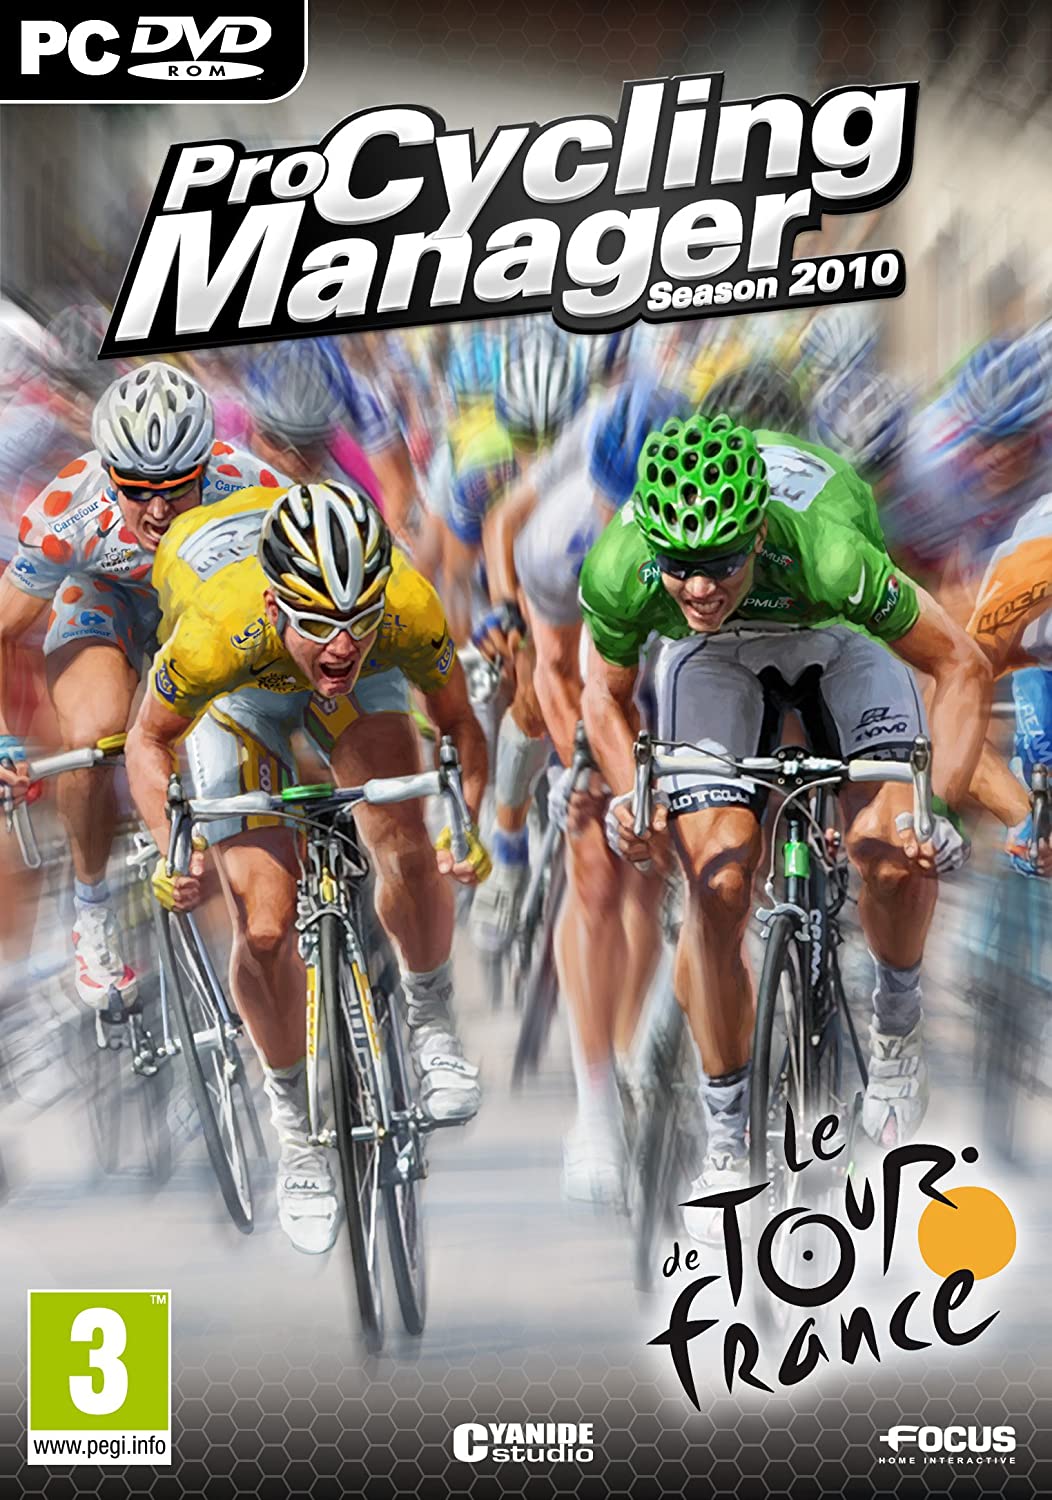 Pro Cycling Manager 2010 (PC-DVD)